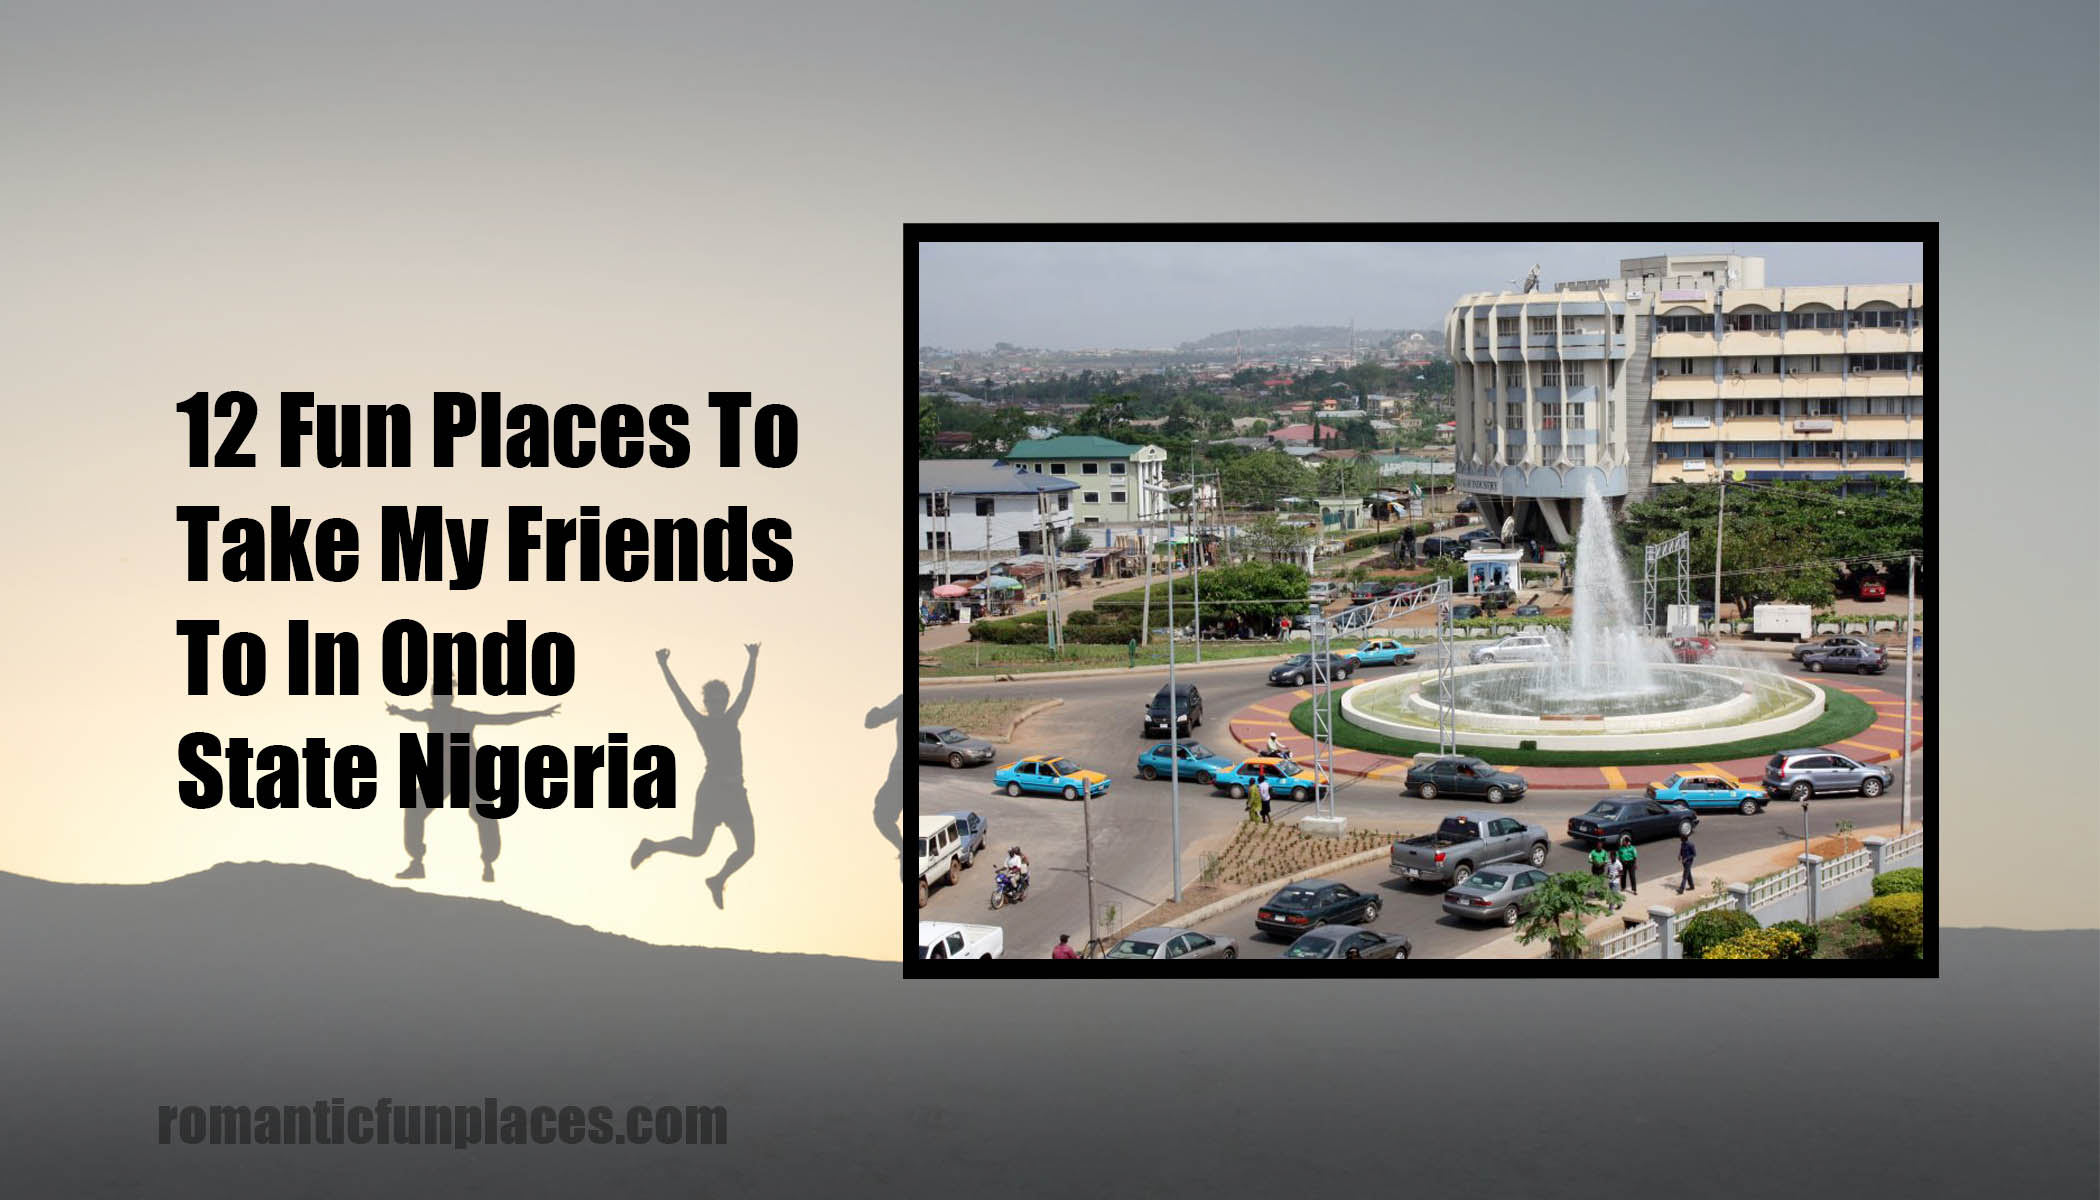 12 Fun Places To Take My Friends To In Ondo State Nigeria